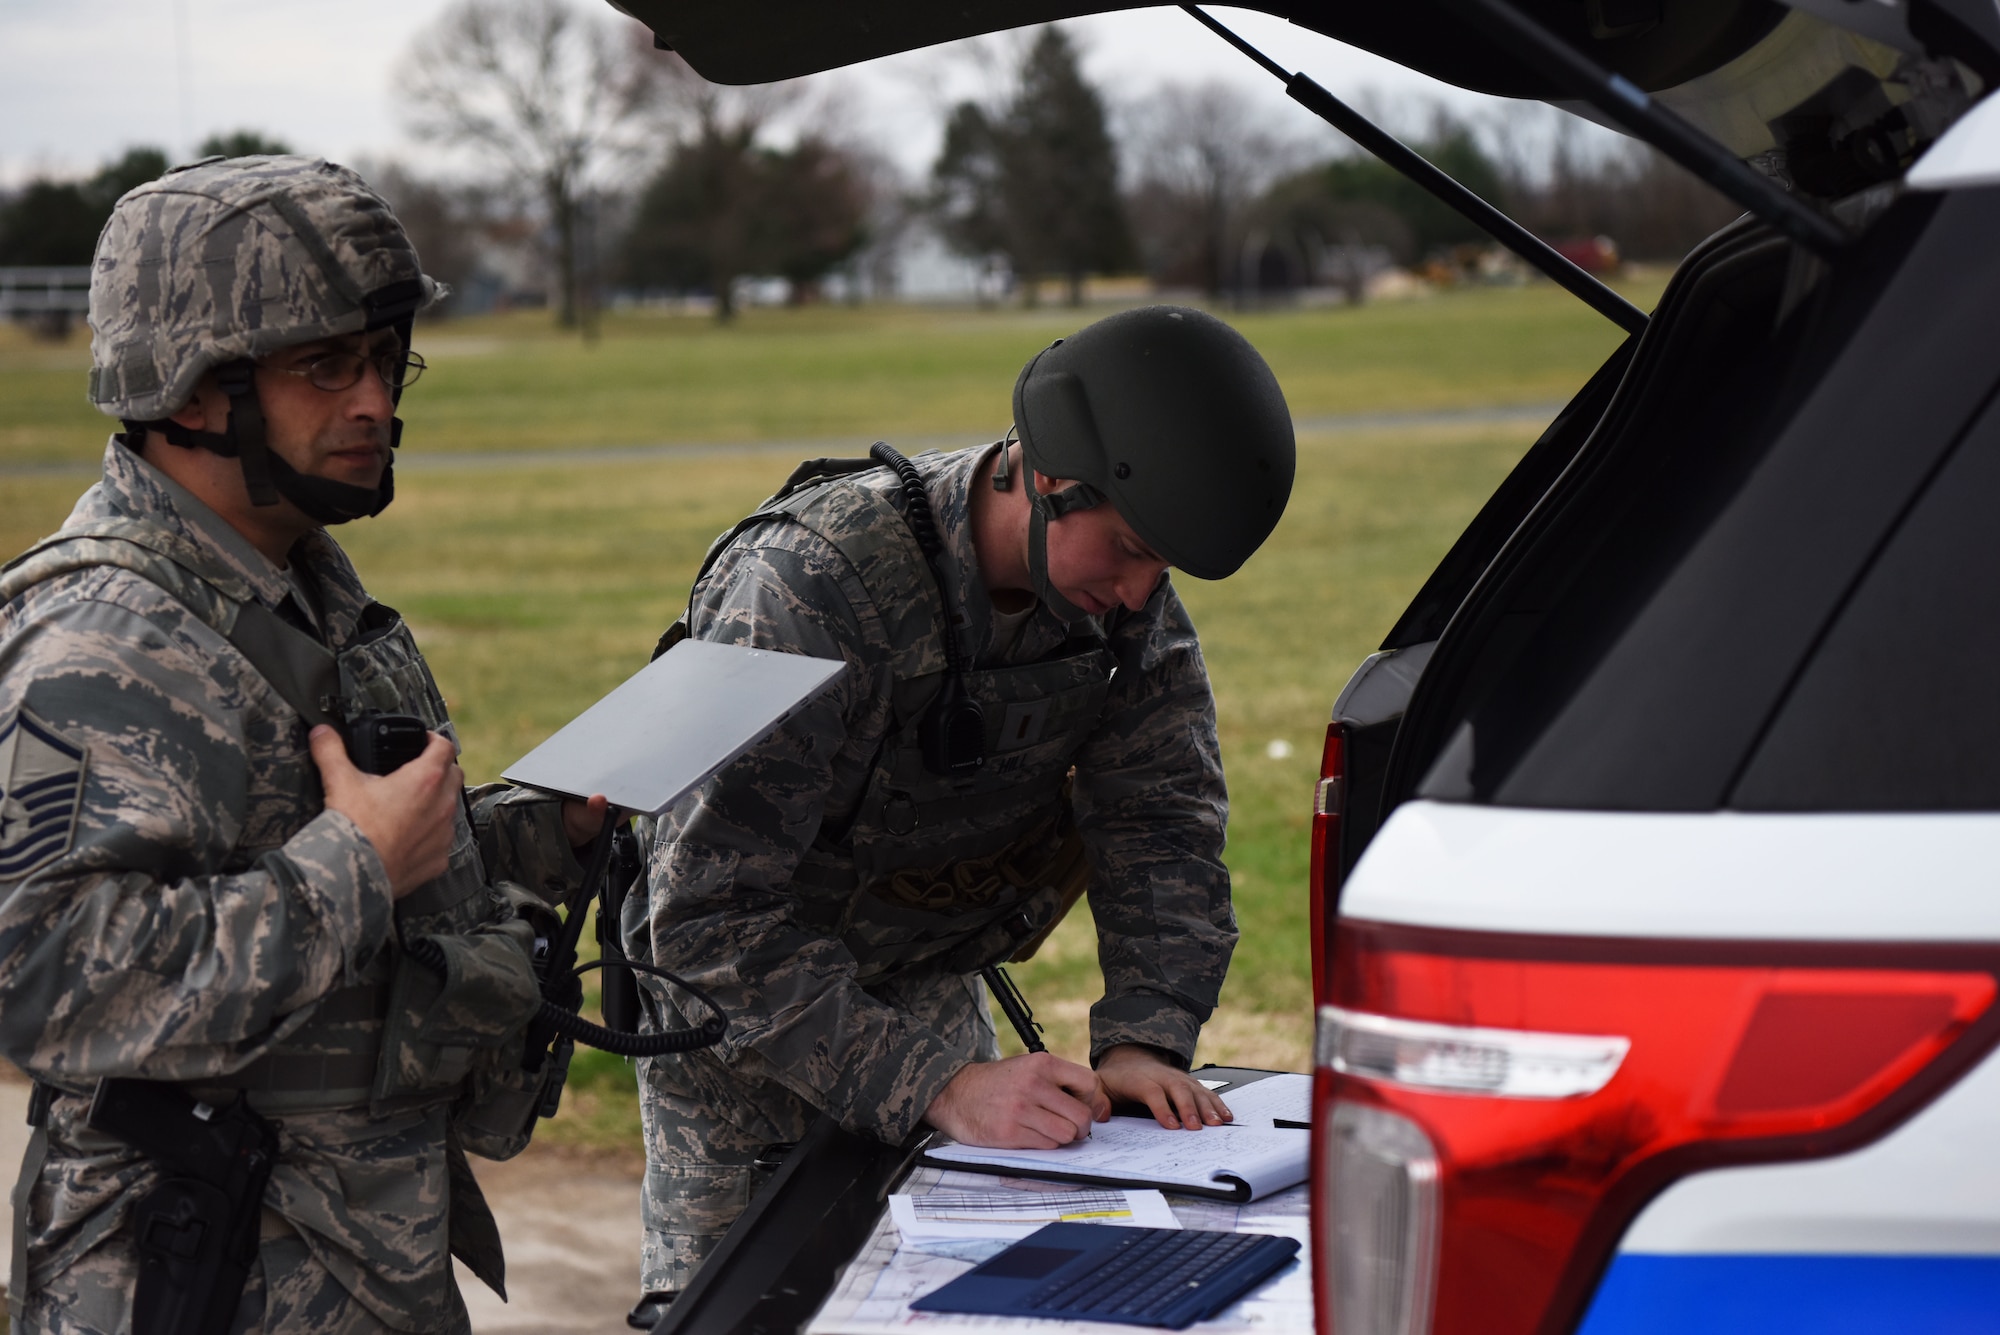 Master Sgt. Brett Snyder (left), 436th Security Forces Squadron, and 2nd Lt. Henry Hill, 436th SFS, maintain on-scene command and control of their responding forces during an active shooter exercise at the George S. Welch Elementary School and Dover Air Force Base Middle School Feb. 26, 2018, at Dover AFB, Del. A key part of the exercise was to ensure Security Forces and school faculty understood each other’s roles in the event of a real world incident. (U.S. Air Force photo by Airman 1st Class Zoe M. Wockenfuss)